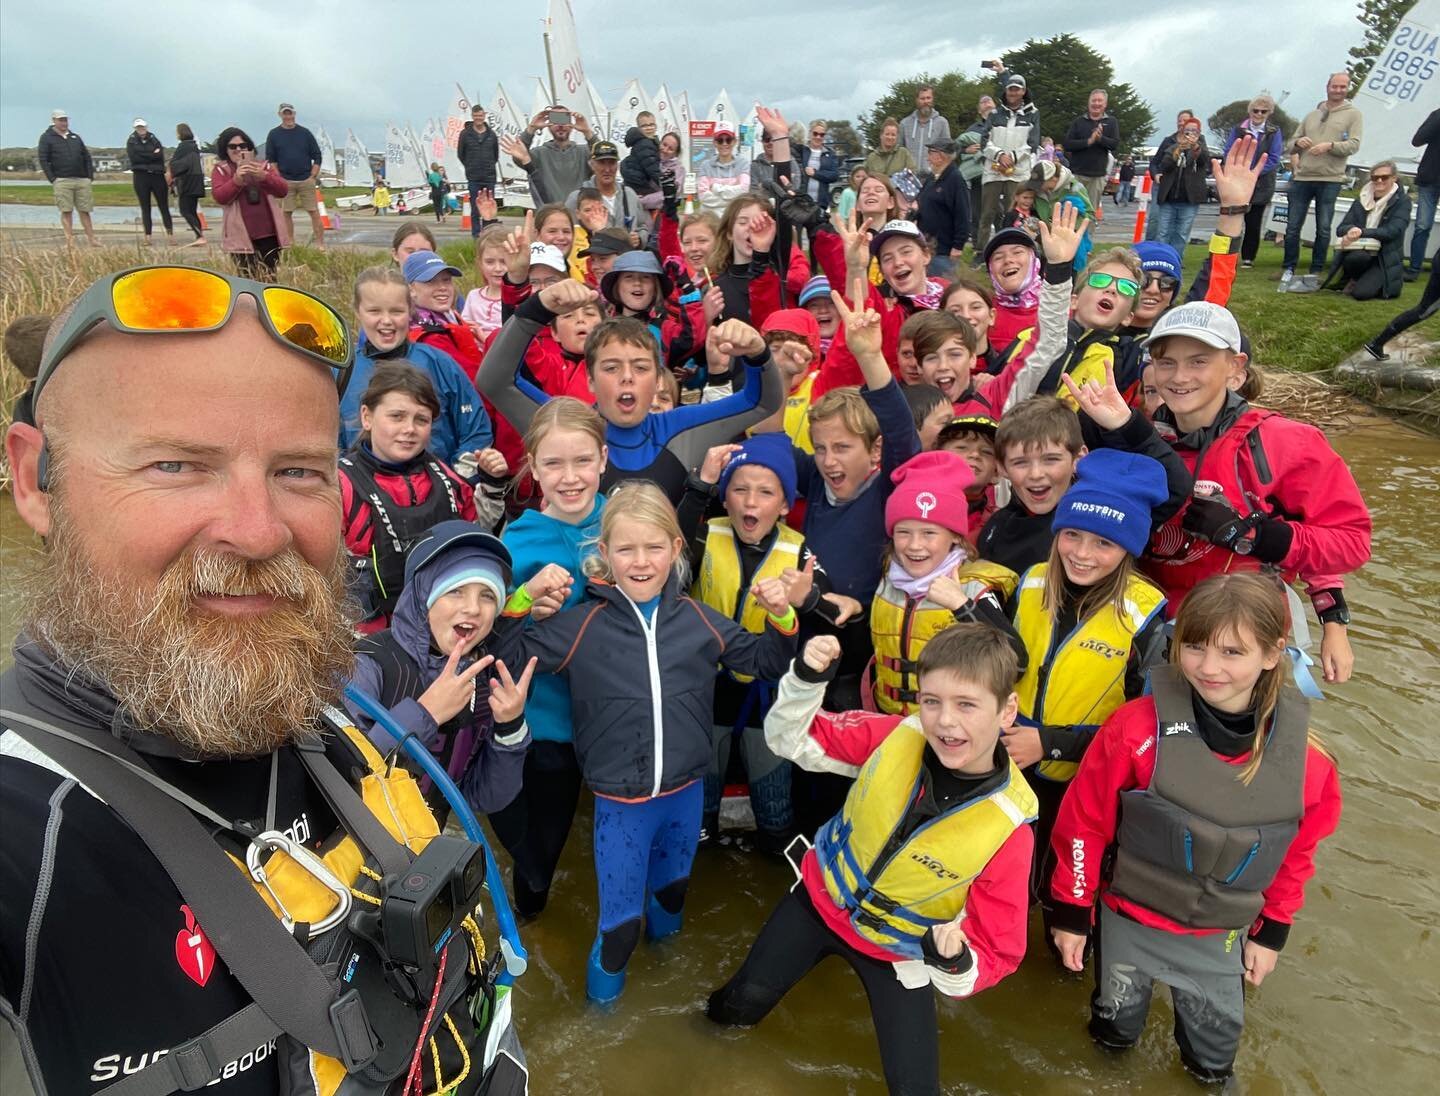 Mind blowing welcome at Goolwa today - every km, every stroke, every metre a new WR. Well, once GWR give it the ✅. 

Tomorrow is for me. 

Thanks to Lena and Peter for their support and coordination.

My story, and the story of this expedition will b